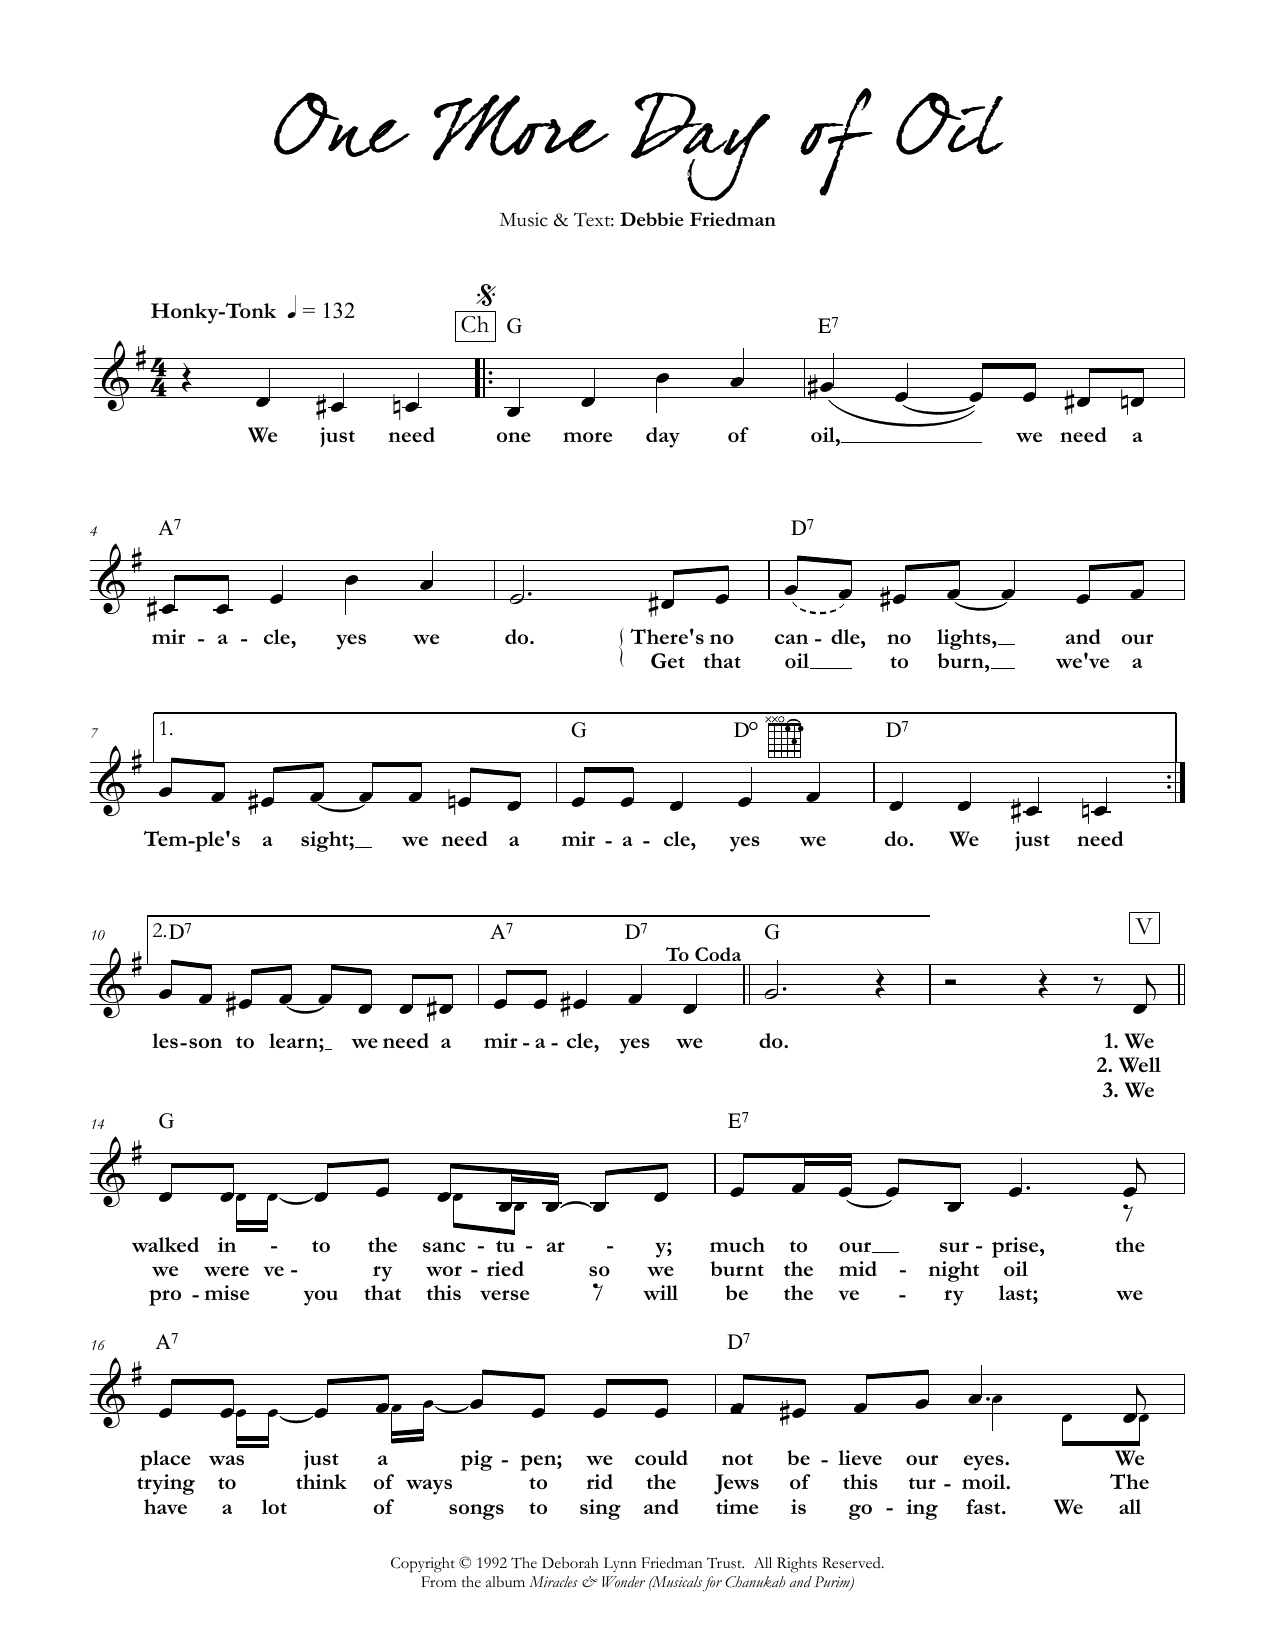 Download Debbie Friedman One More Day of Oil Sheet Music